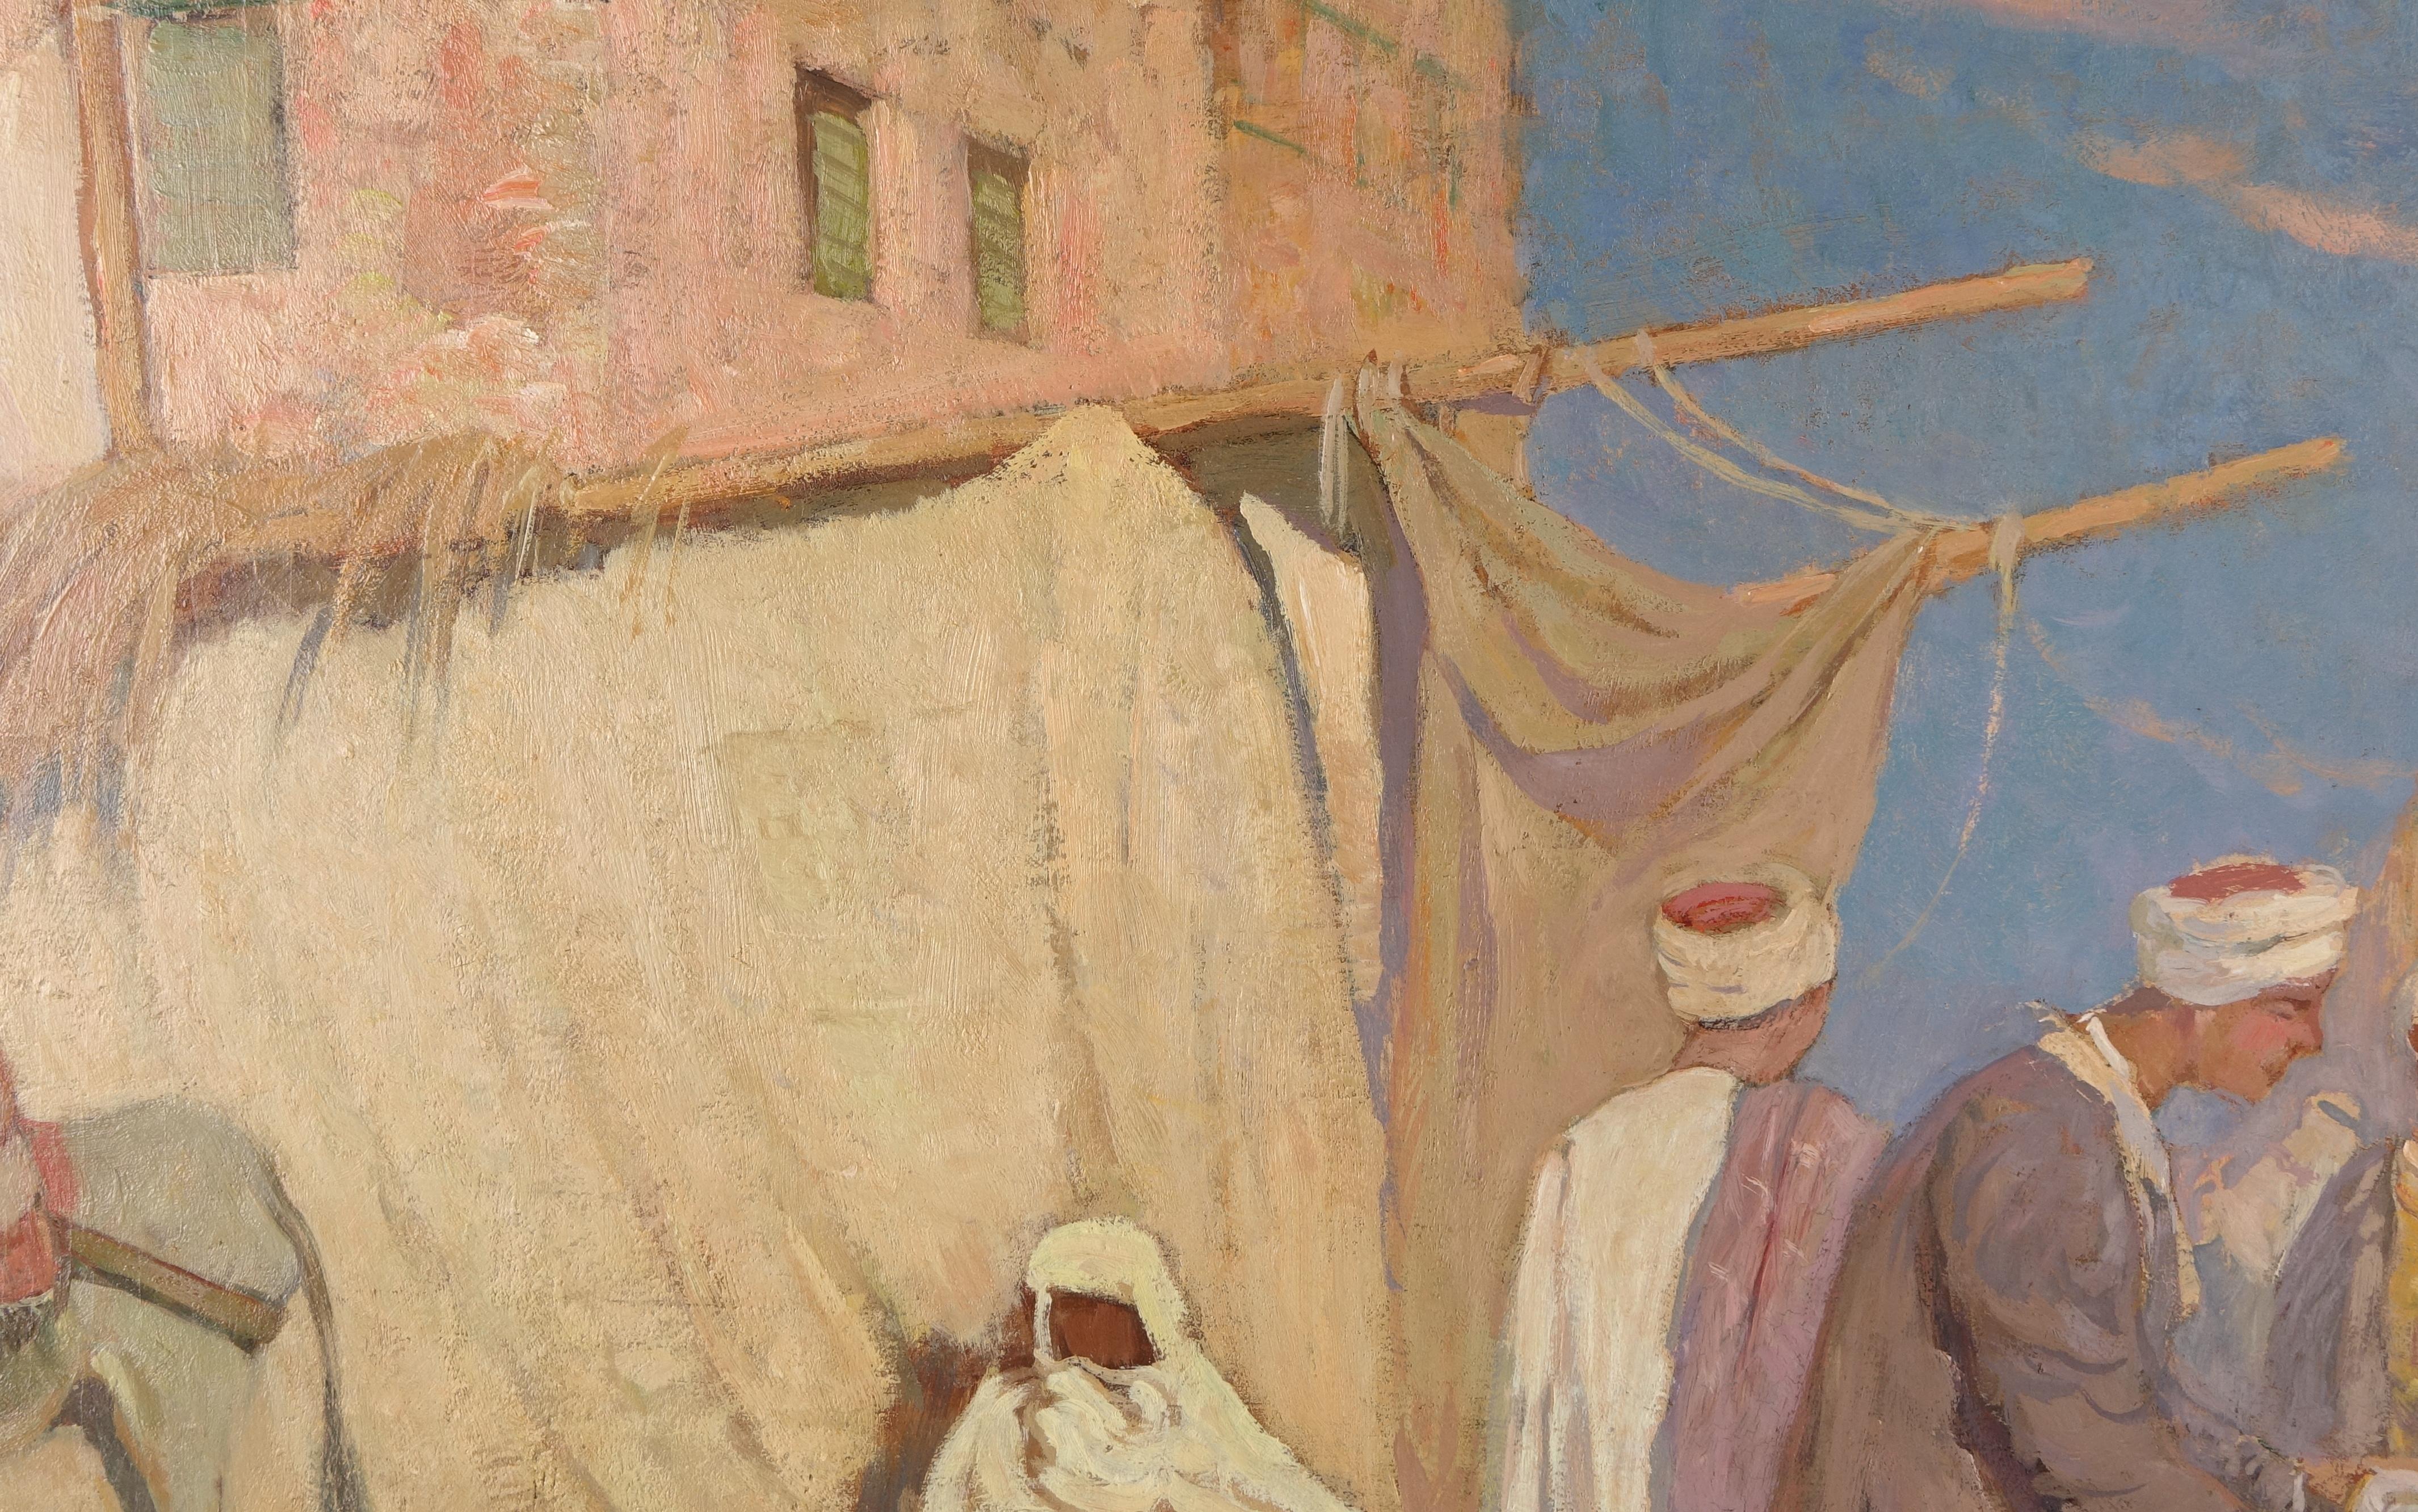 Orientalist Painting Signet and Dated Moretti Foggia 1910, Cairo 2